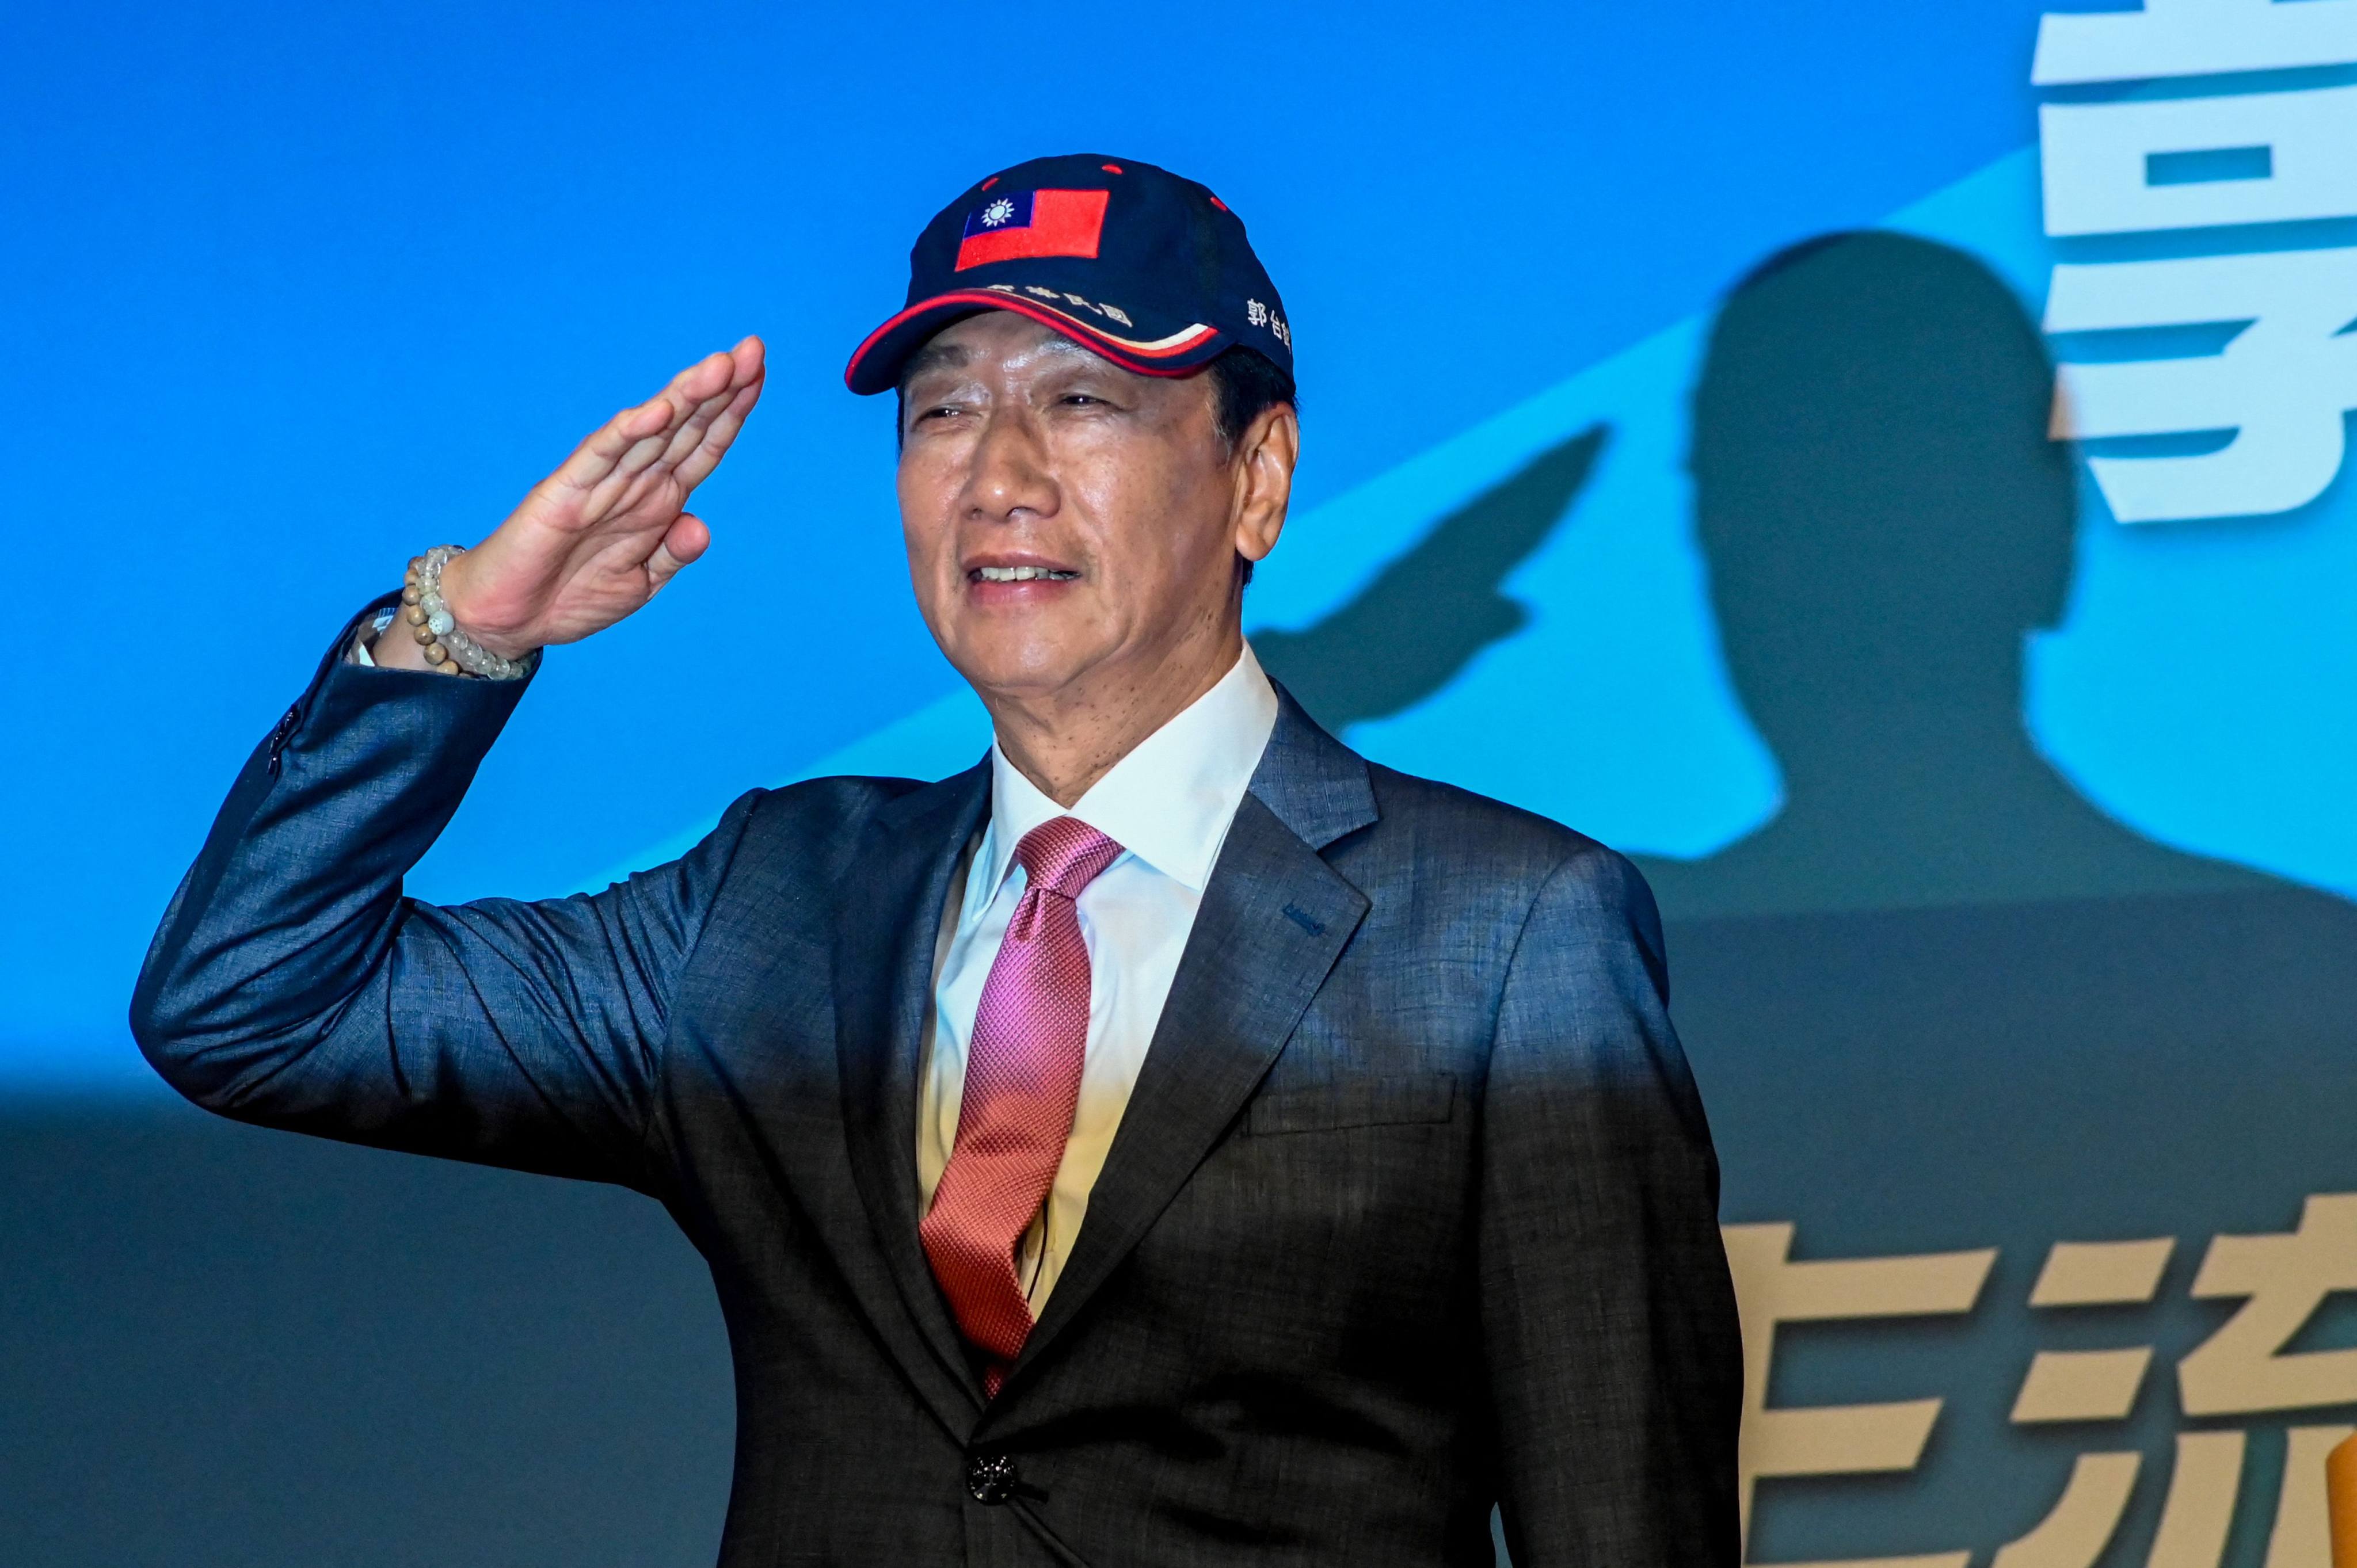 Former Foxconn Founder Terry Gou salutes during a press conference in Taipei on August 28, 2023. Gou announced that he will run for president of Taiwan as an independent candidate. Photo: AFP